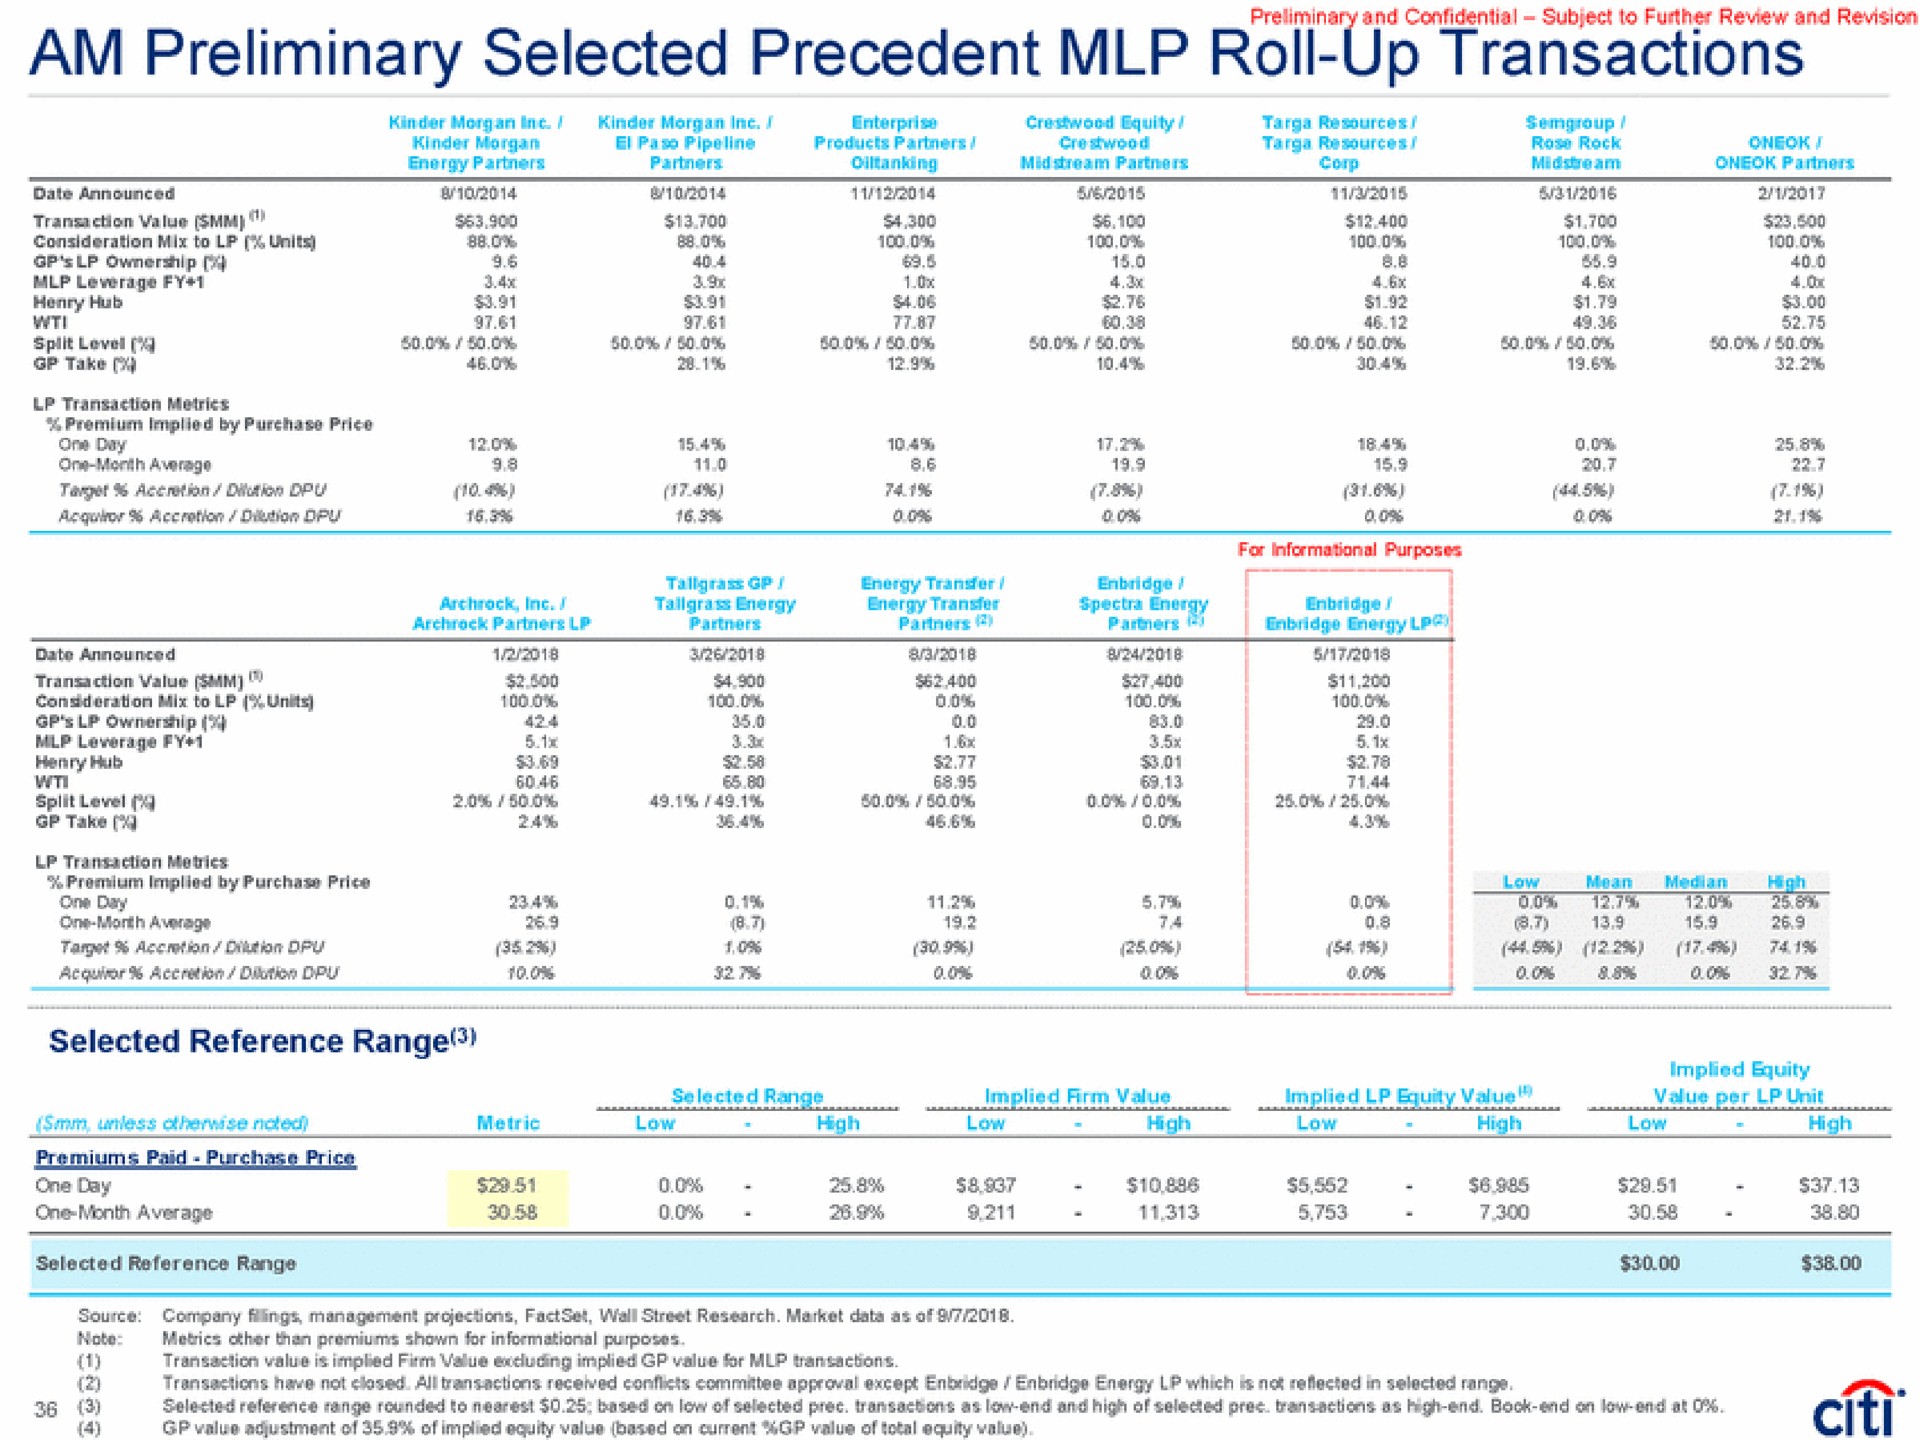 transactions selected reference range | Citi